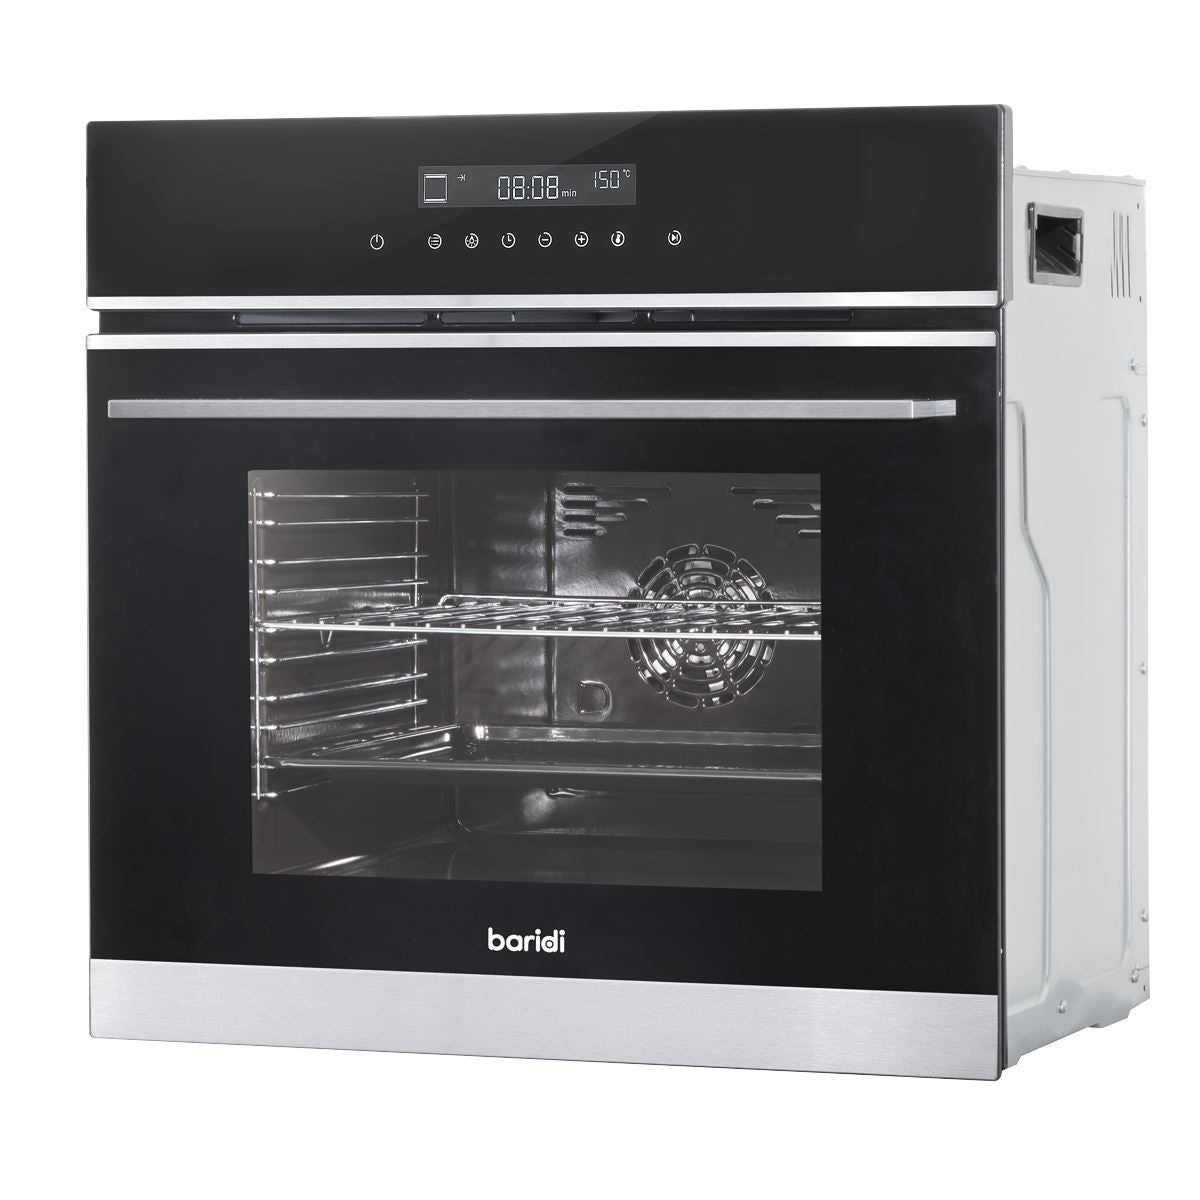 Baridi 60cm Built-In Fan Assisted, Single, Integrated 10 Function Electric Oven, Touchscreen Controls, 72L Capacity, Black/Stainless Steel